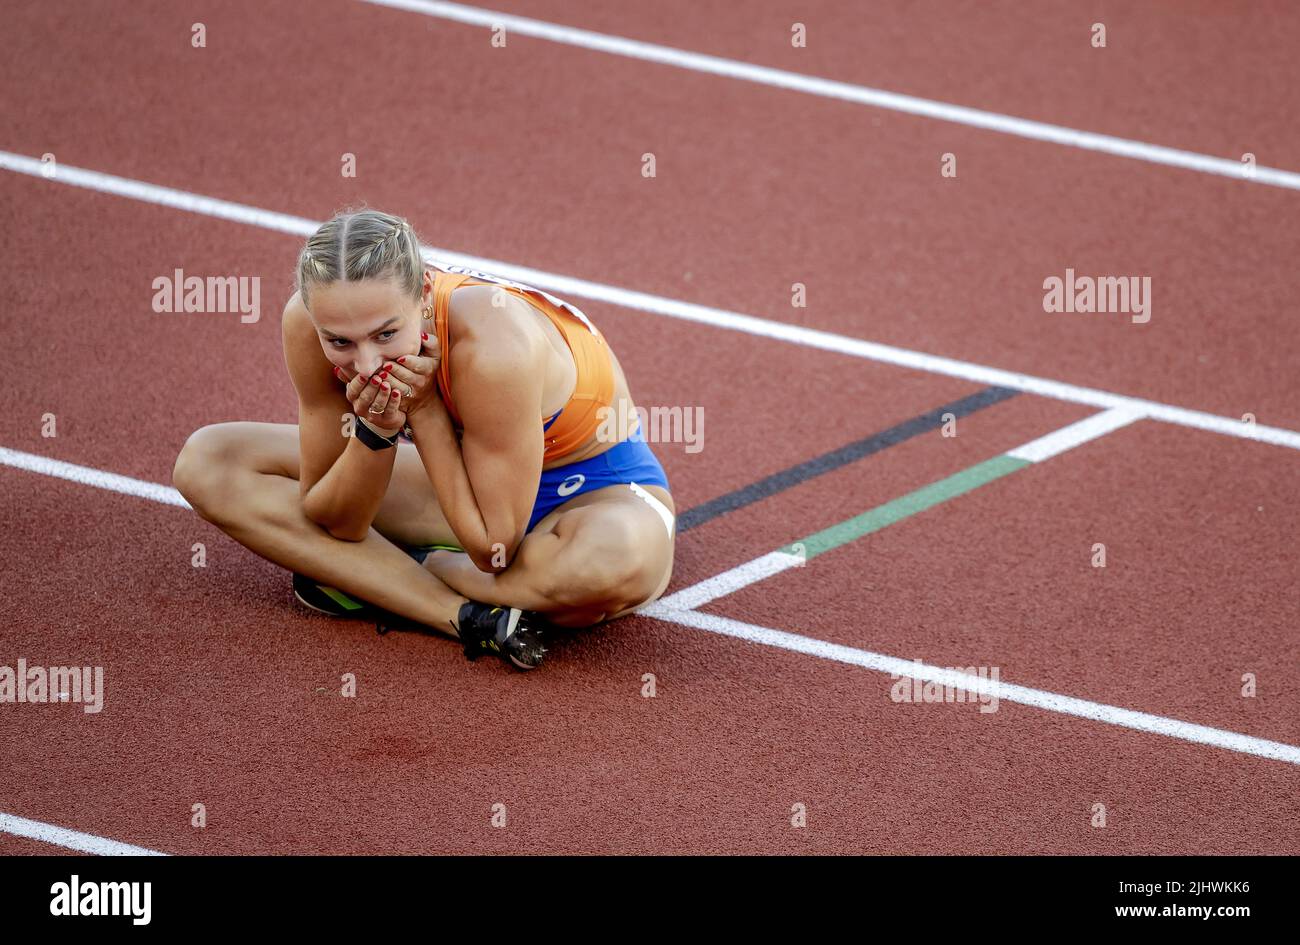 2022-07-21 03:55:23 EUGENE - Lieke Klaver in action during the semifinal of the 400 meters on the sixth day of the World Athletics Championships at the Hayward Field stadium. ANP ROBIN VAN LONKHUIJSEN netherlands out - belgium out Stock Photo